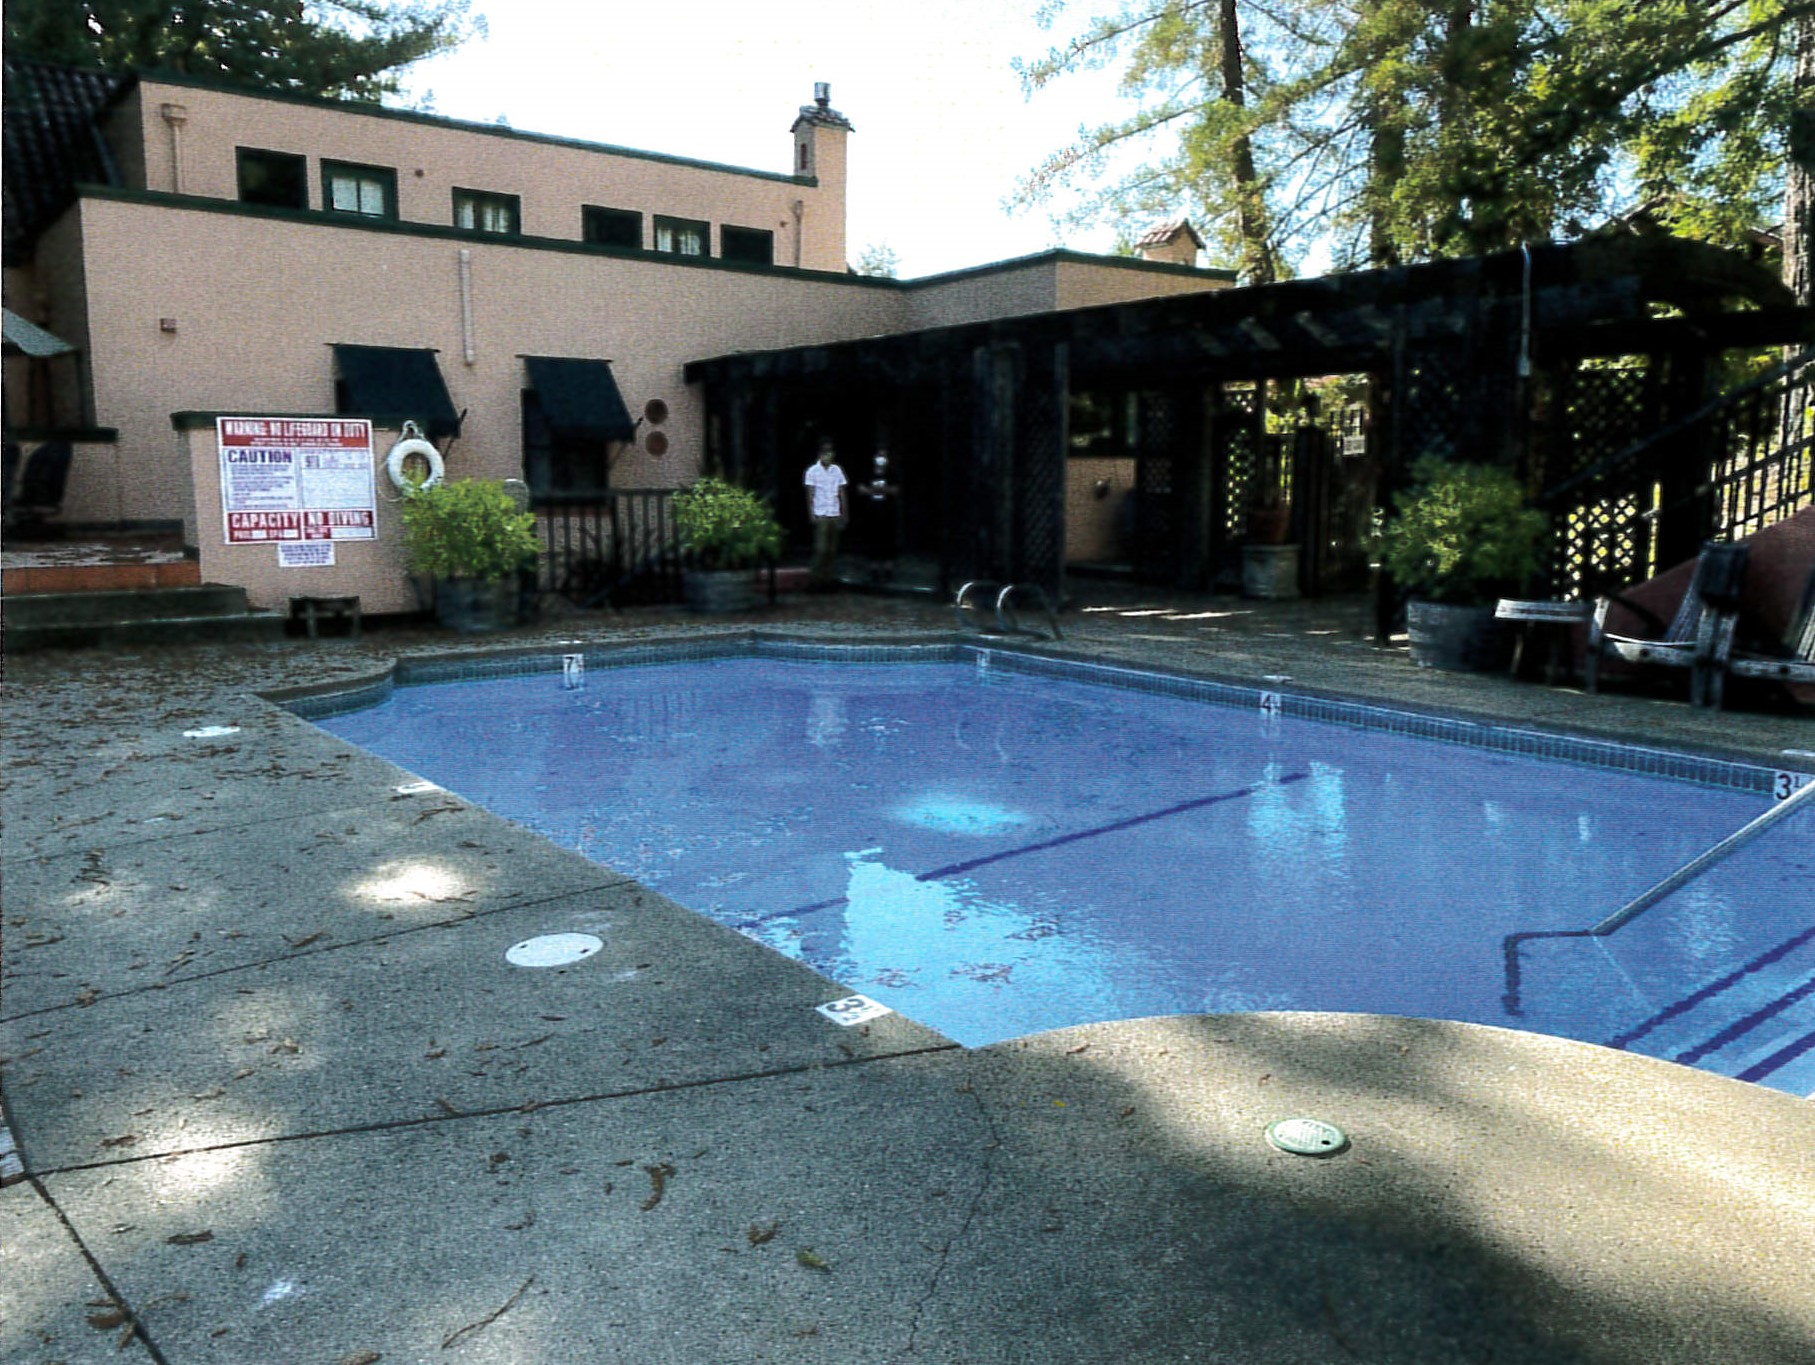 Closer view of east facade and pool area